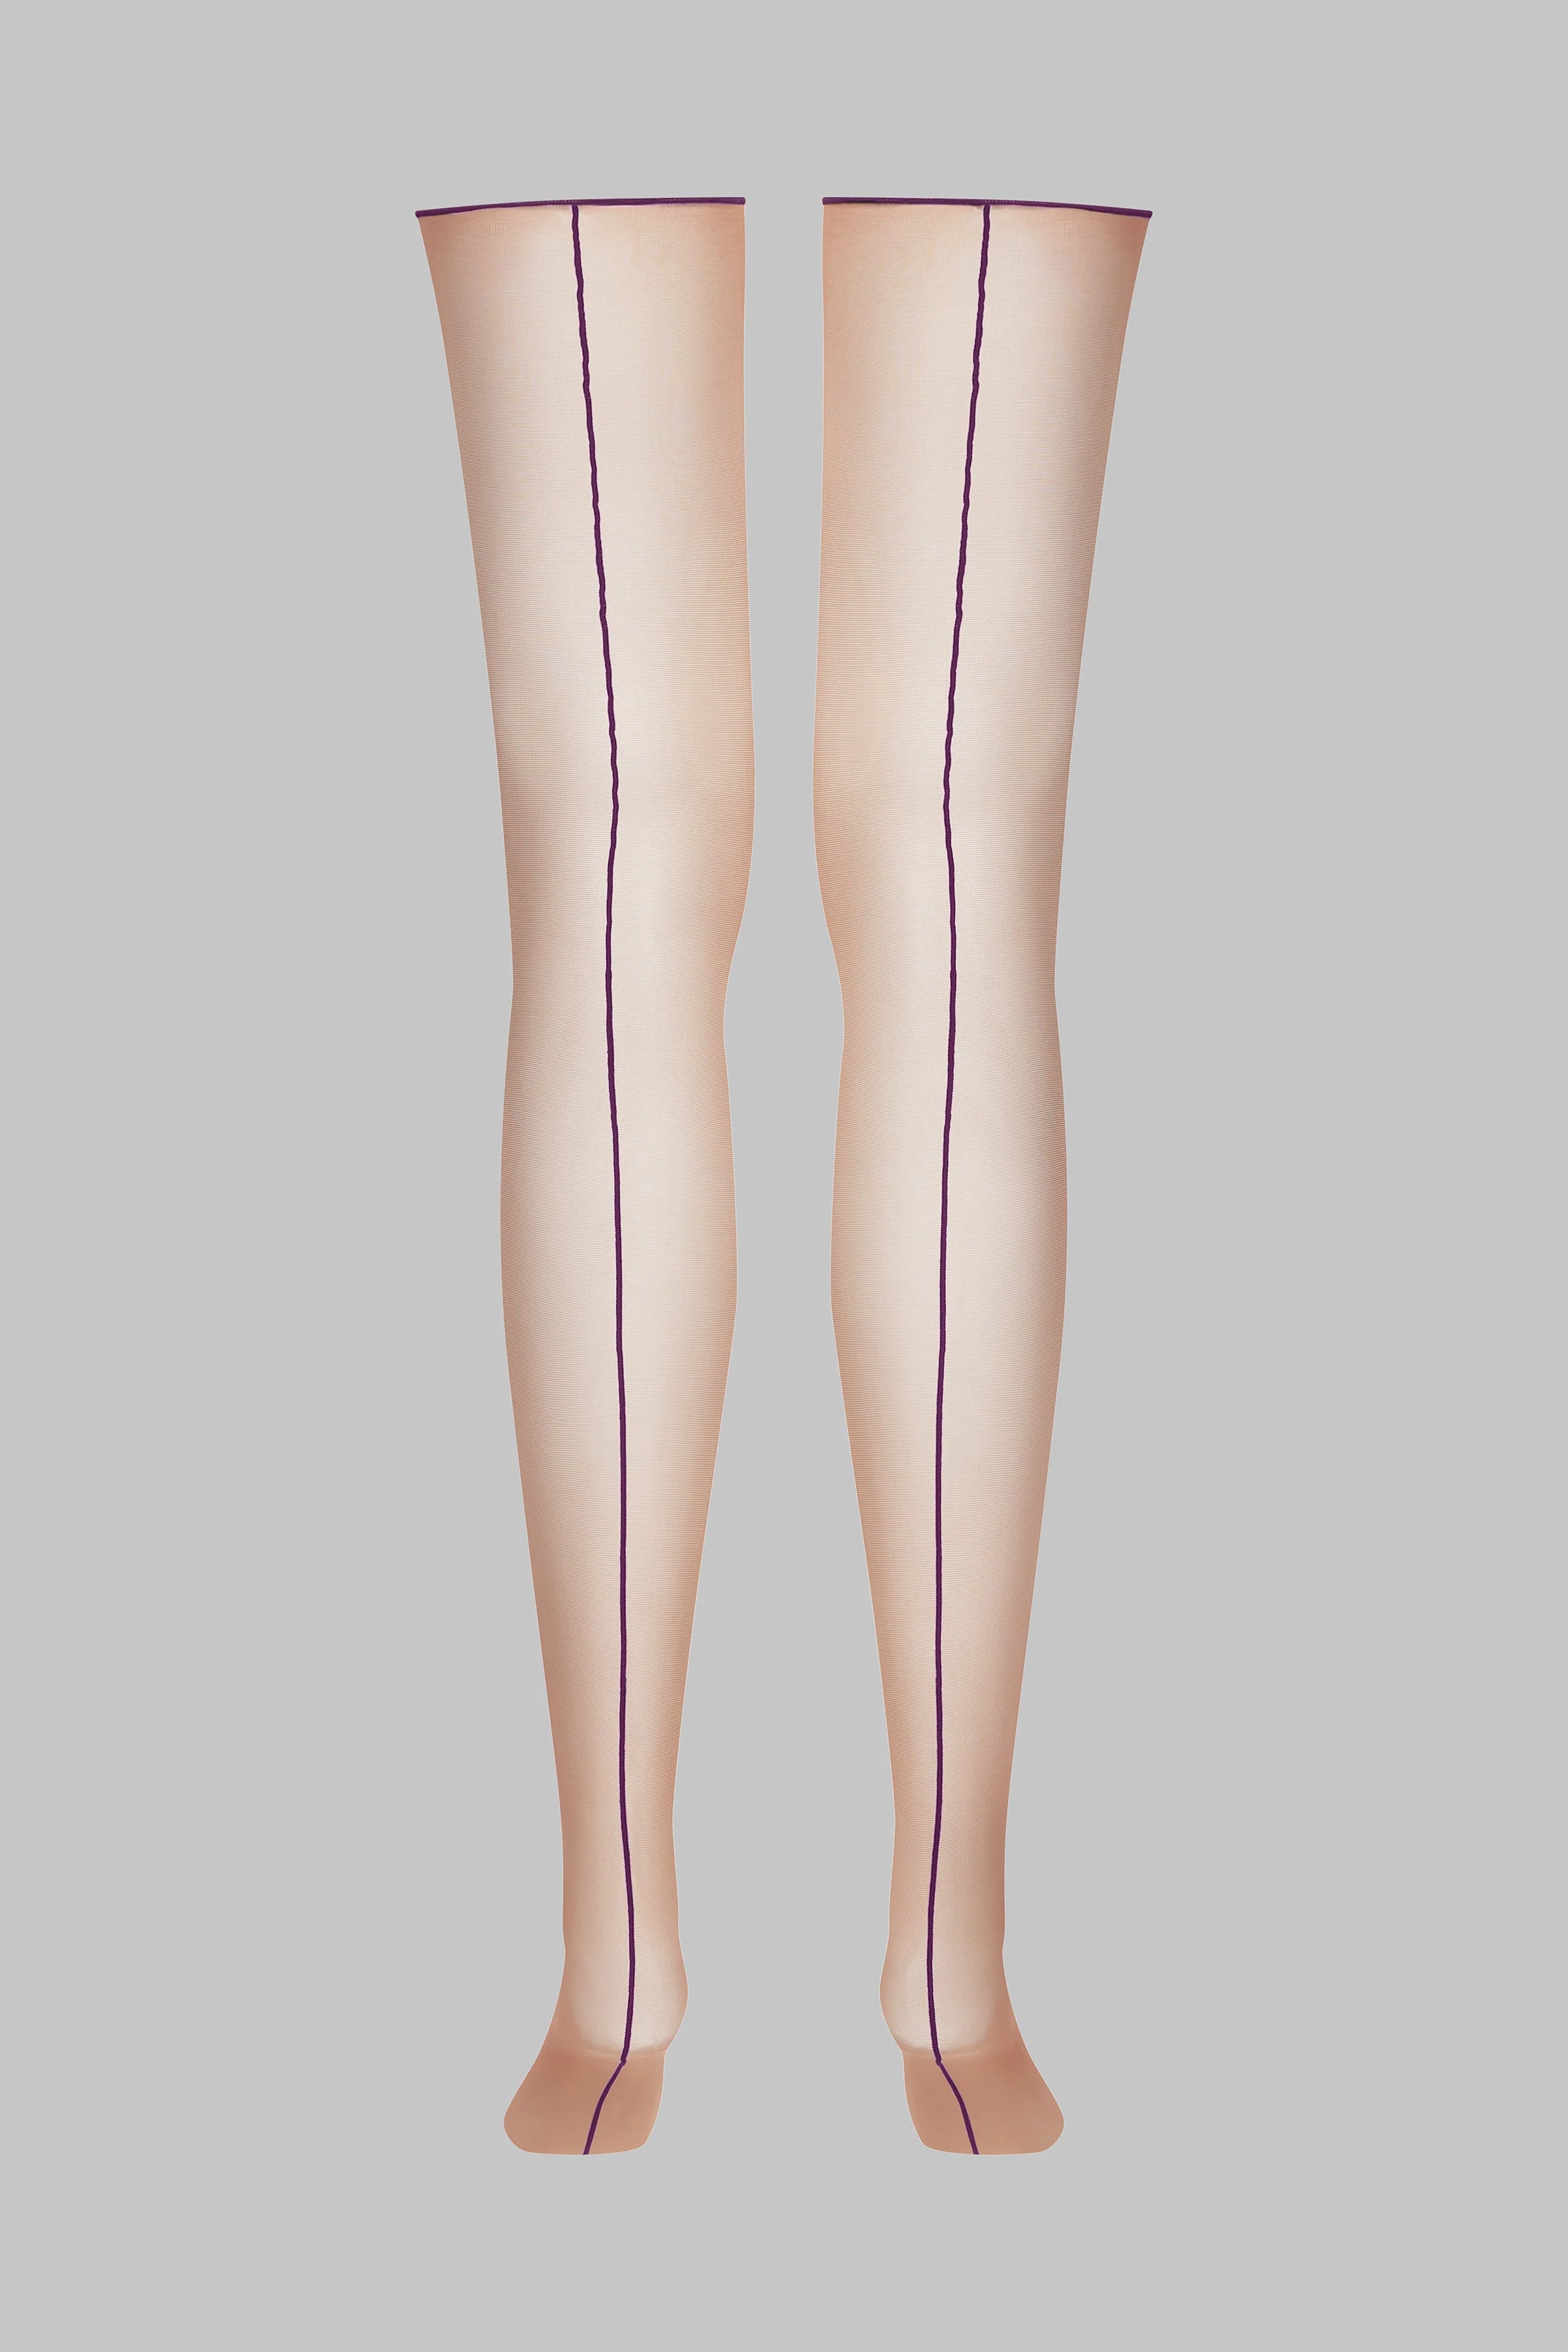 Cut and curled back seamed stockings - Purple 20D